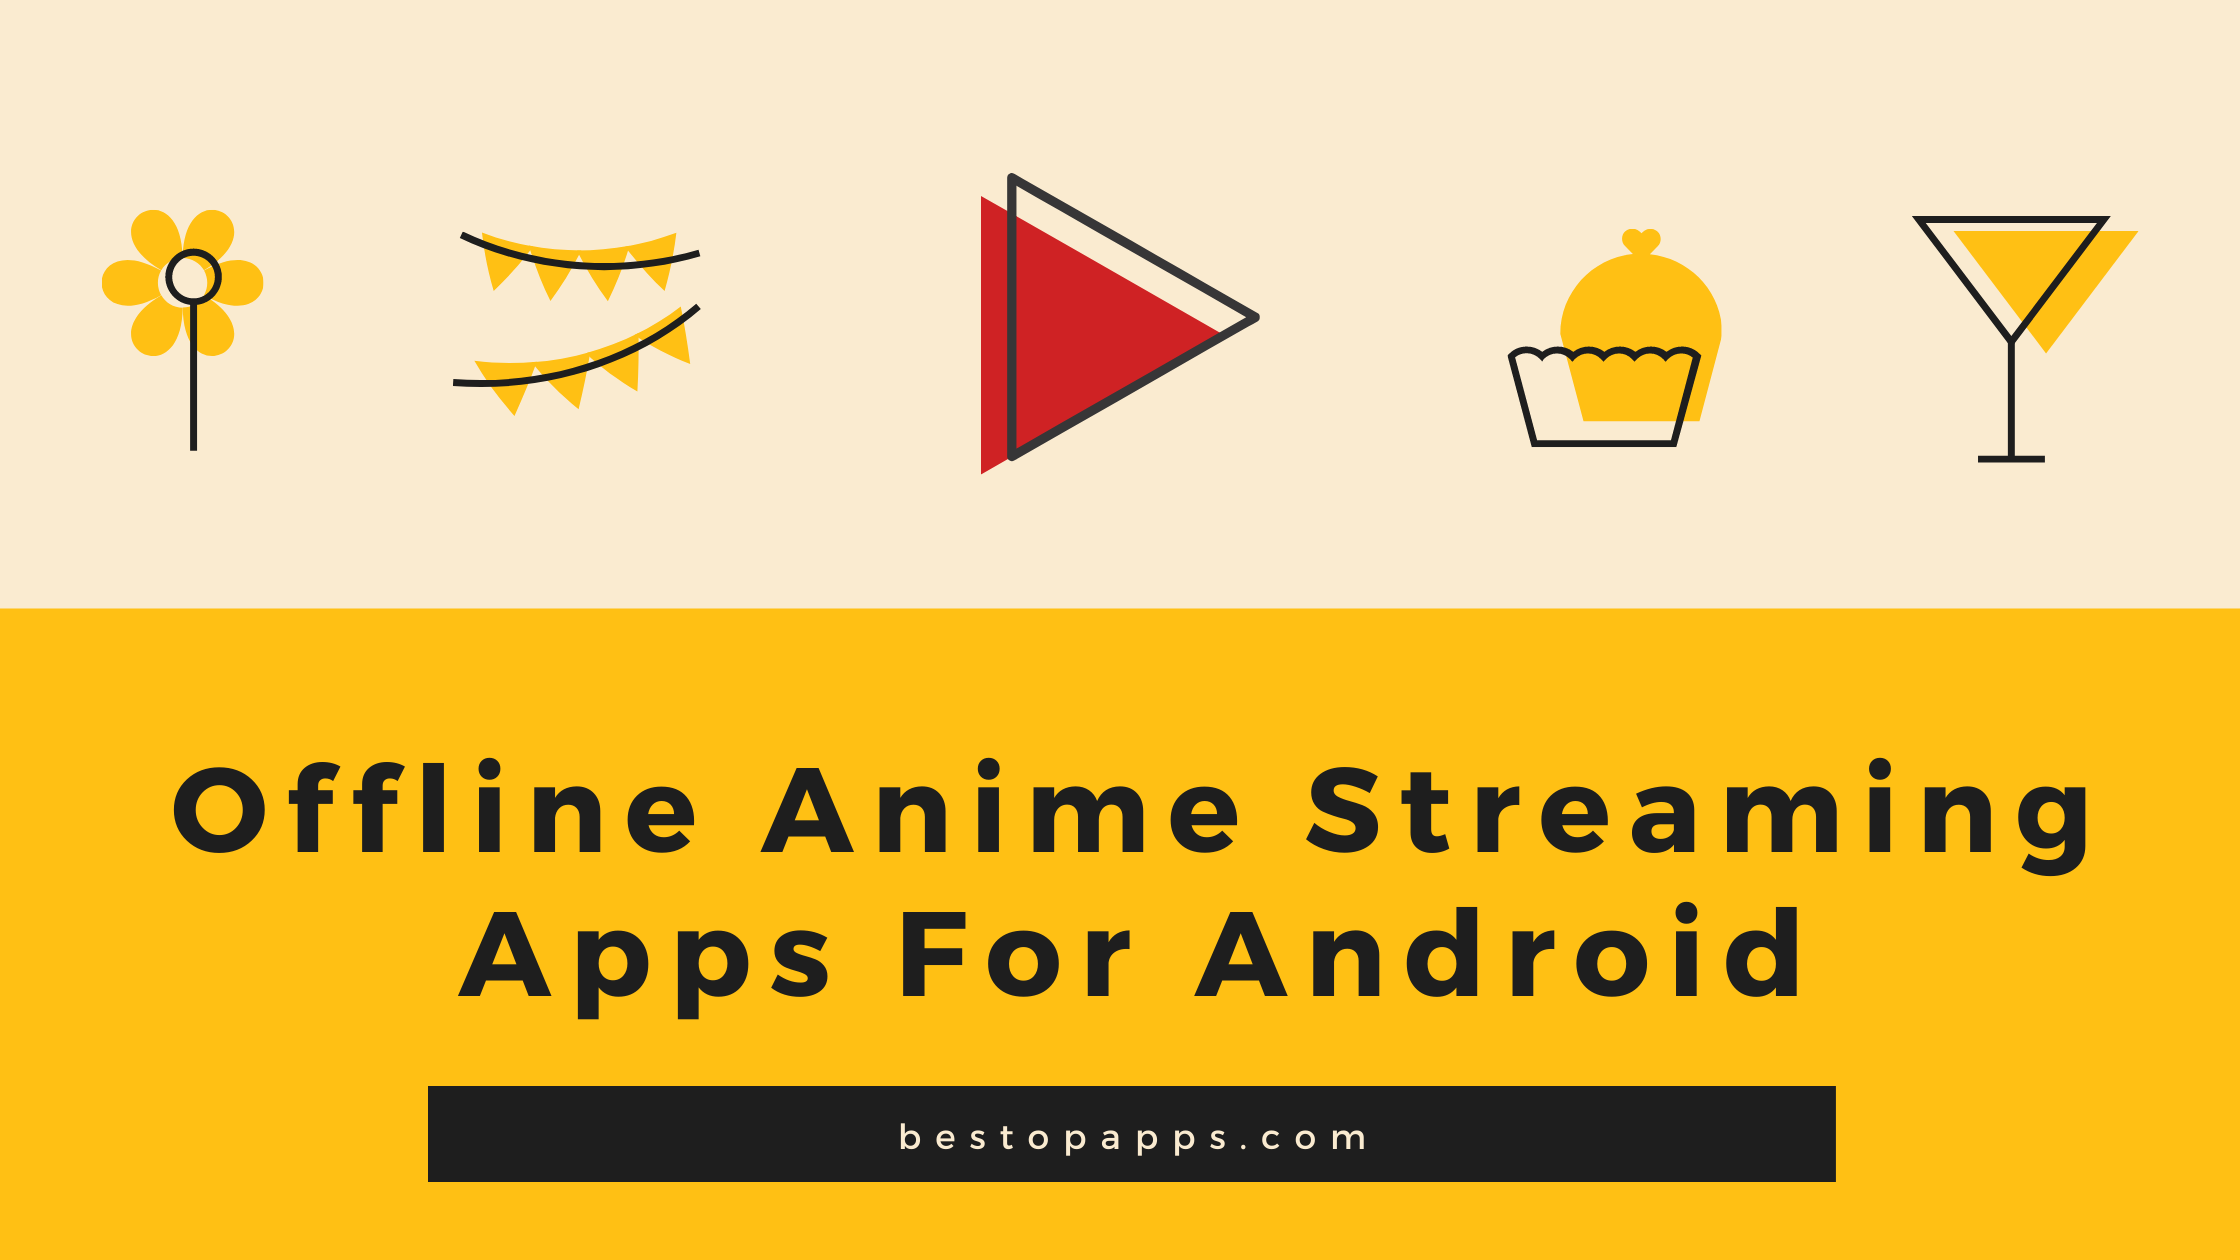 Offline Anime Streaming Apps For Android